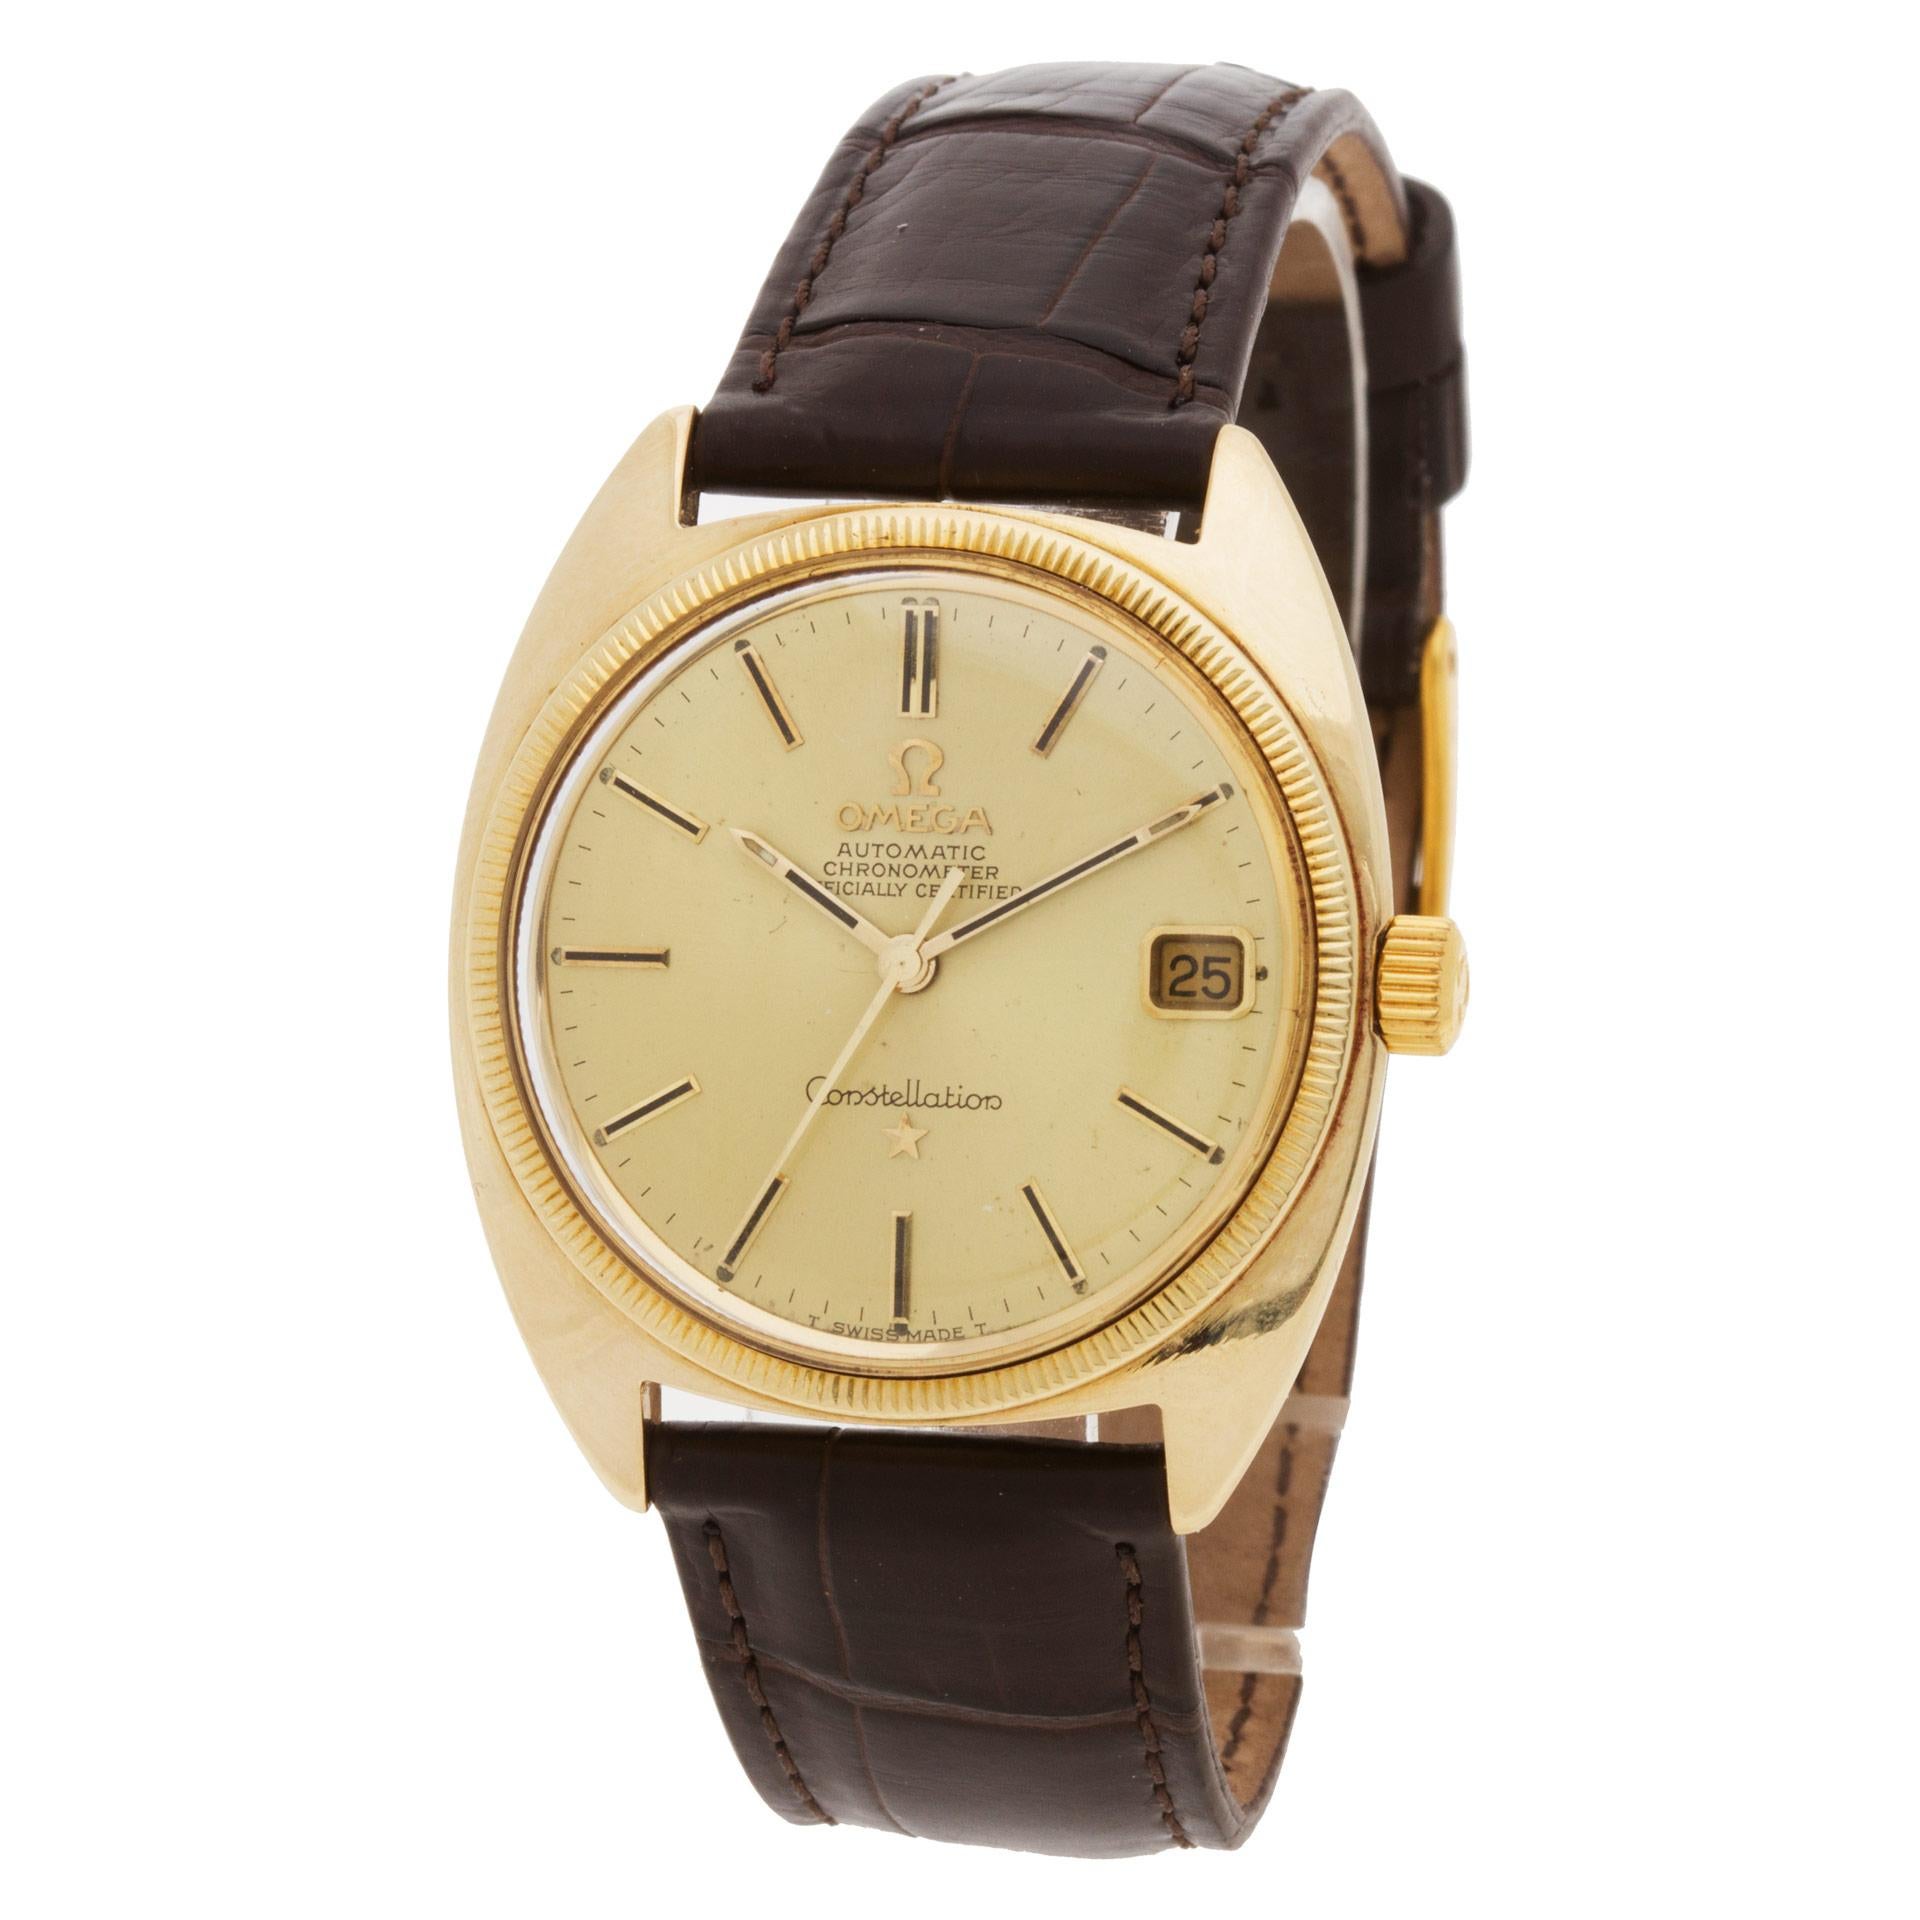 Omega Constellation in 14k on a brown alligator band. Auto w/ sweep seconds and date. 33 mm case size. Ref 168029. Circa 1970s. Fine Pre-owned Omega Watch.   Certified preowned Dress Omega Constellation watch is made out of yellow gold on a Brown